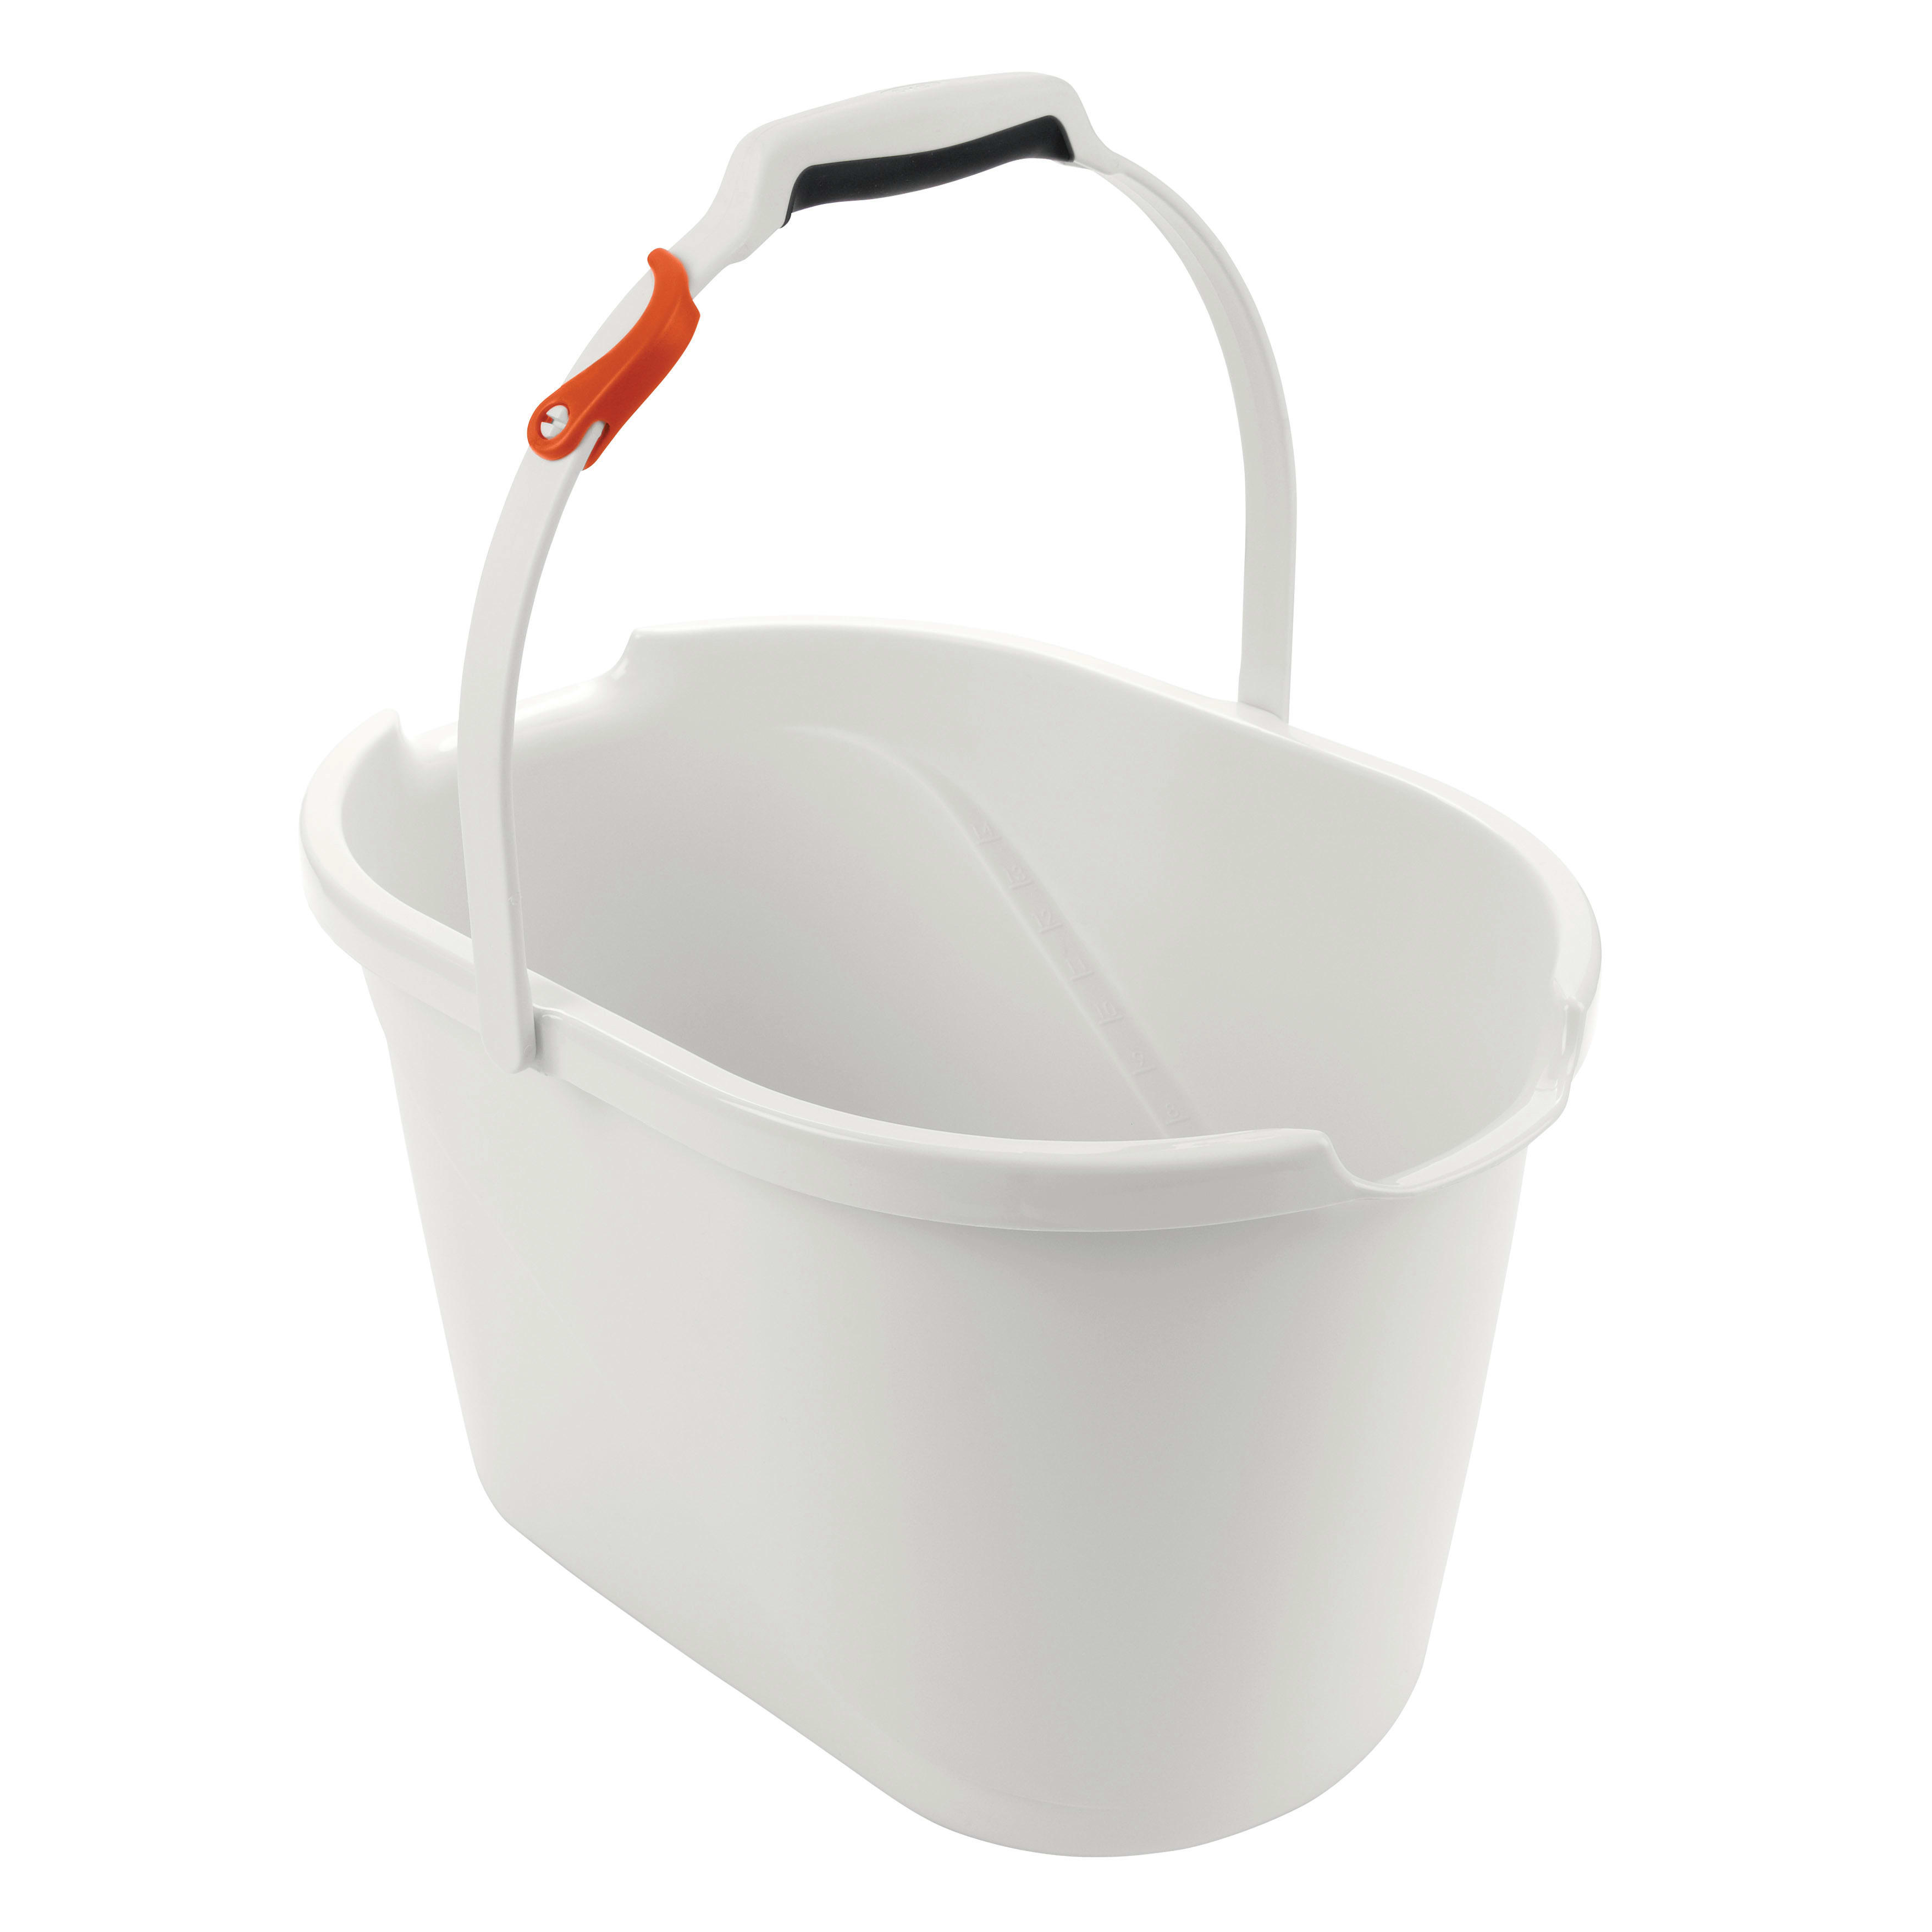 https://cdn.apartmenttherapy.info/image/upload/v1621441913/gen-workflow/product-database/oxo-angled-bucket-product.jpg